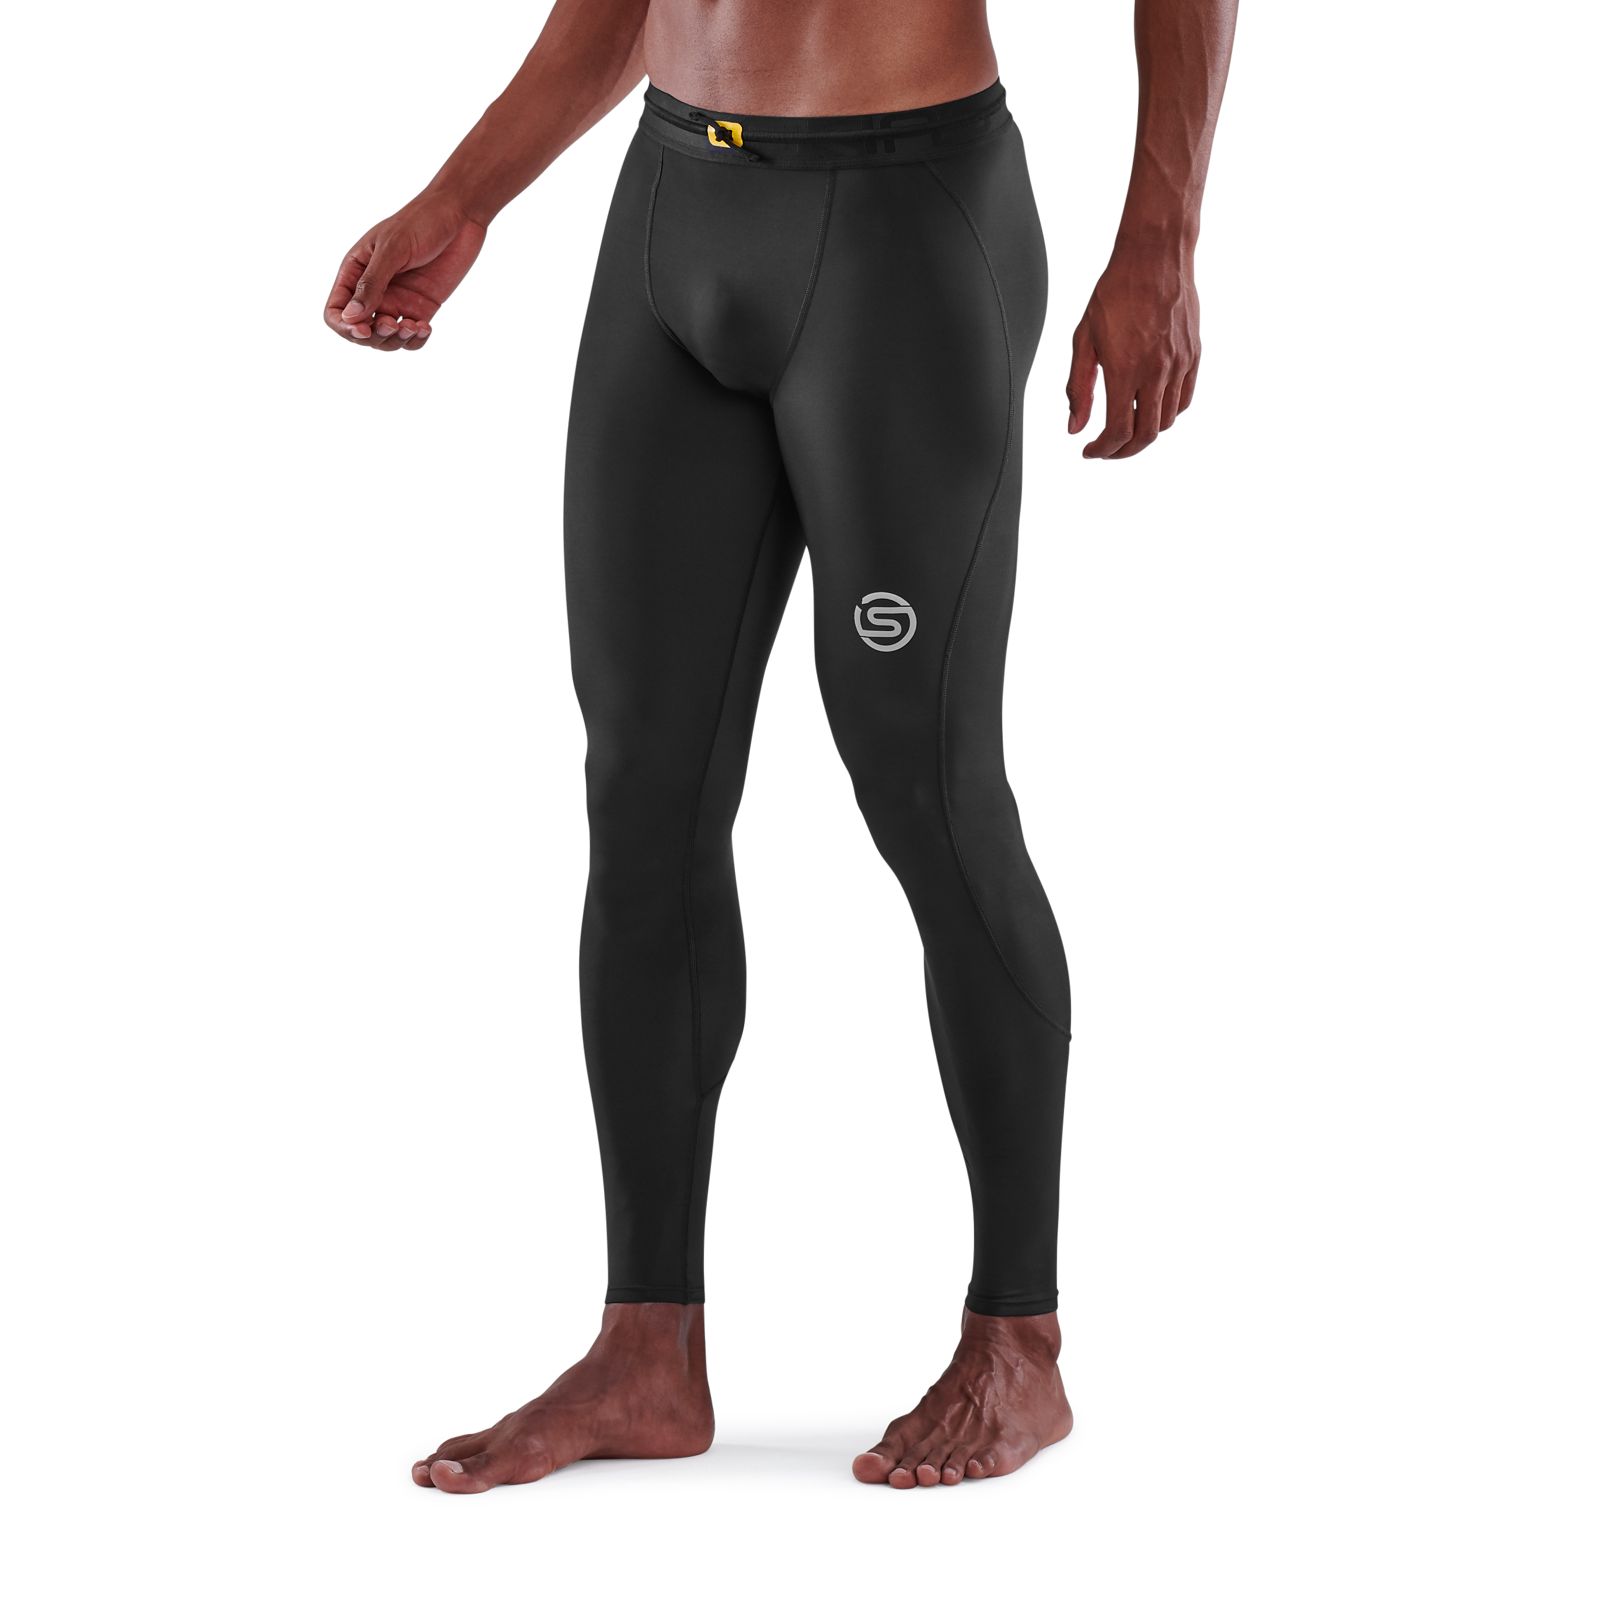 CORETECH® Injury Recovery &Prevention Compression Leggings - Supacore —  Baby Little Planet